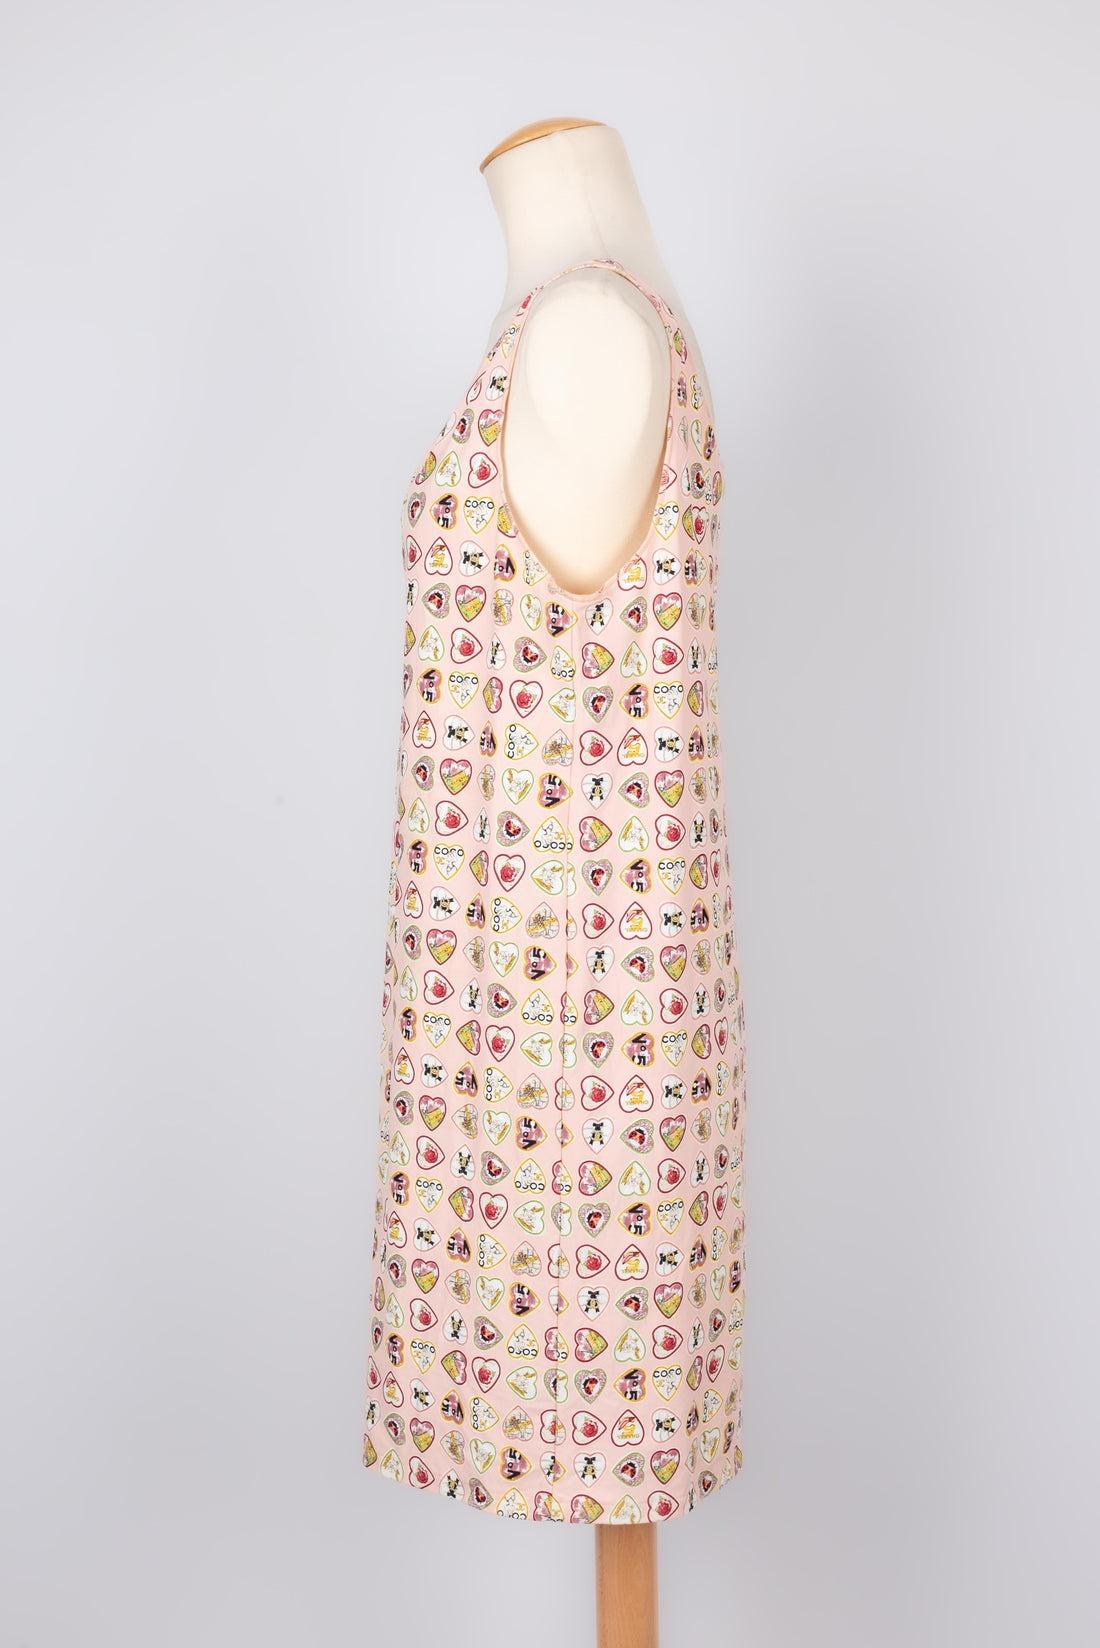 Chanel - (Made in France) Dress printed with hearts on a pink background. Indicated size 44FR. 2006 Collection.

Additional information:
Condition: Very good condition
Dimensions: Chest: 50 cm - Length: 90 cm
Period: 21st Century

Seller Reference: